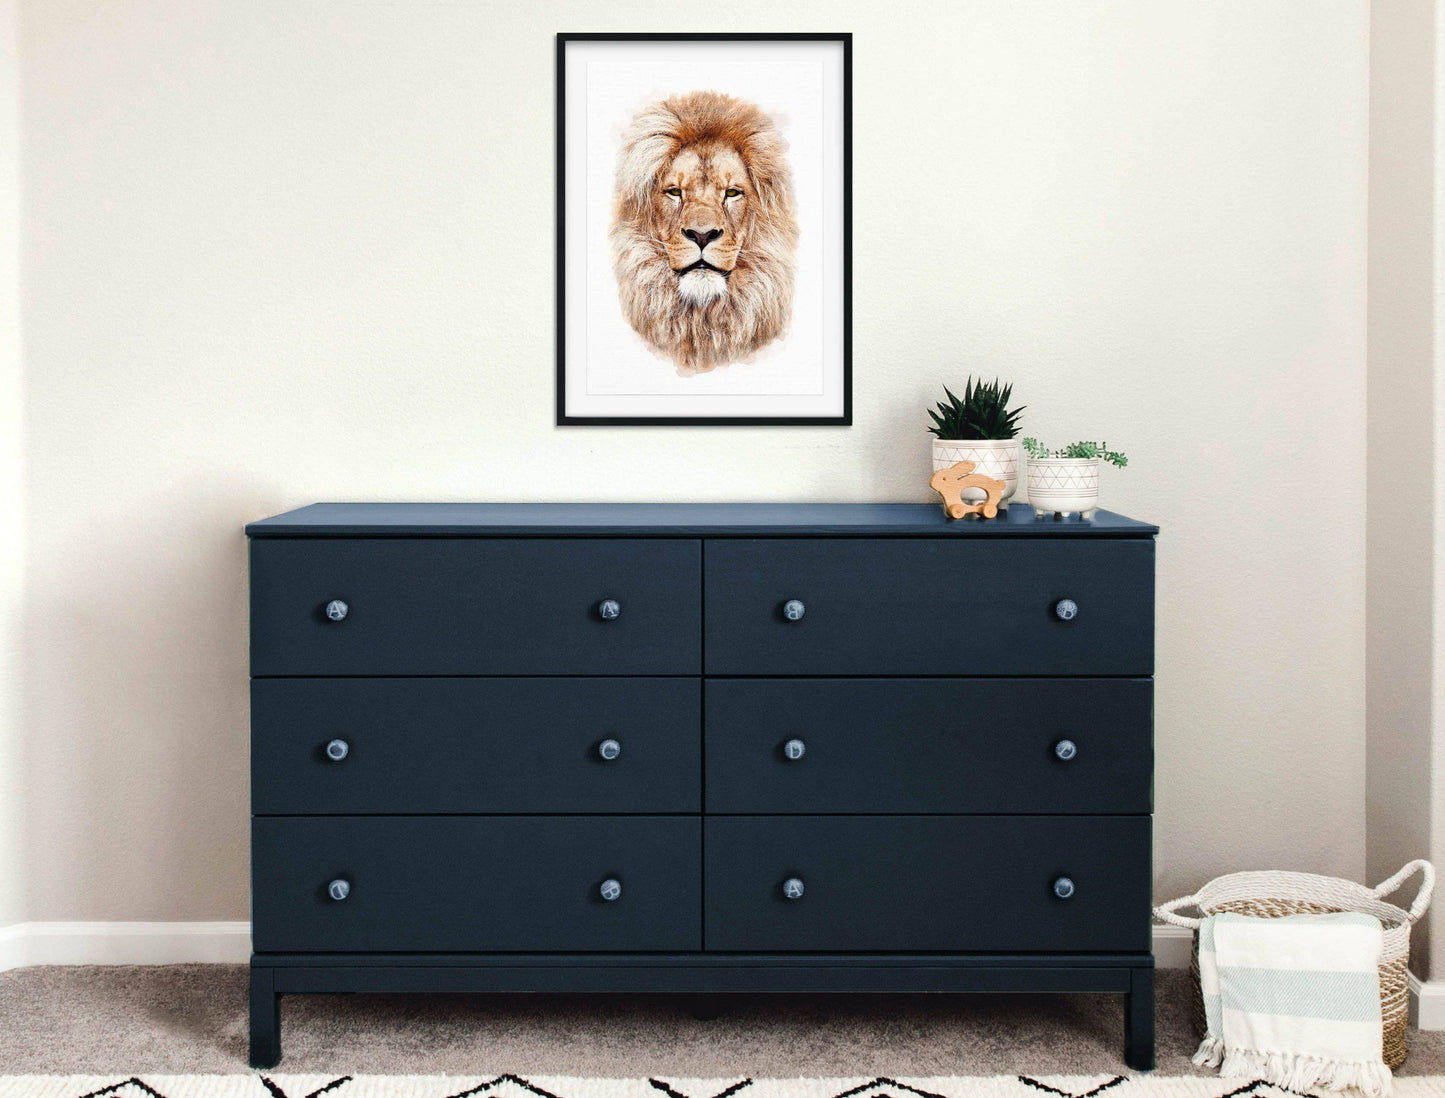 Leo the Lion Print - PRINT - Fable and Fawn 